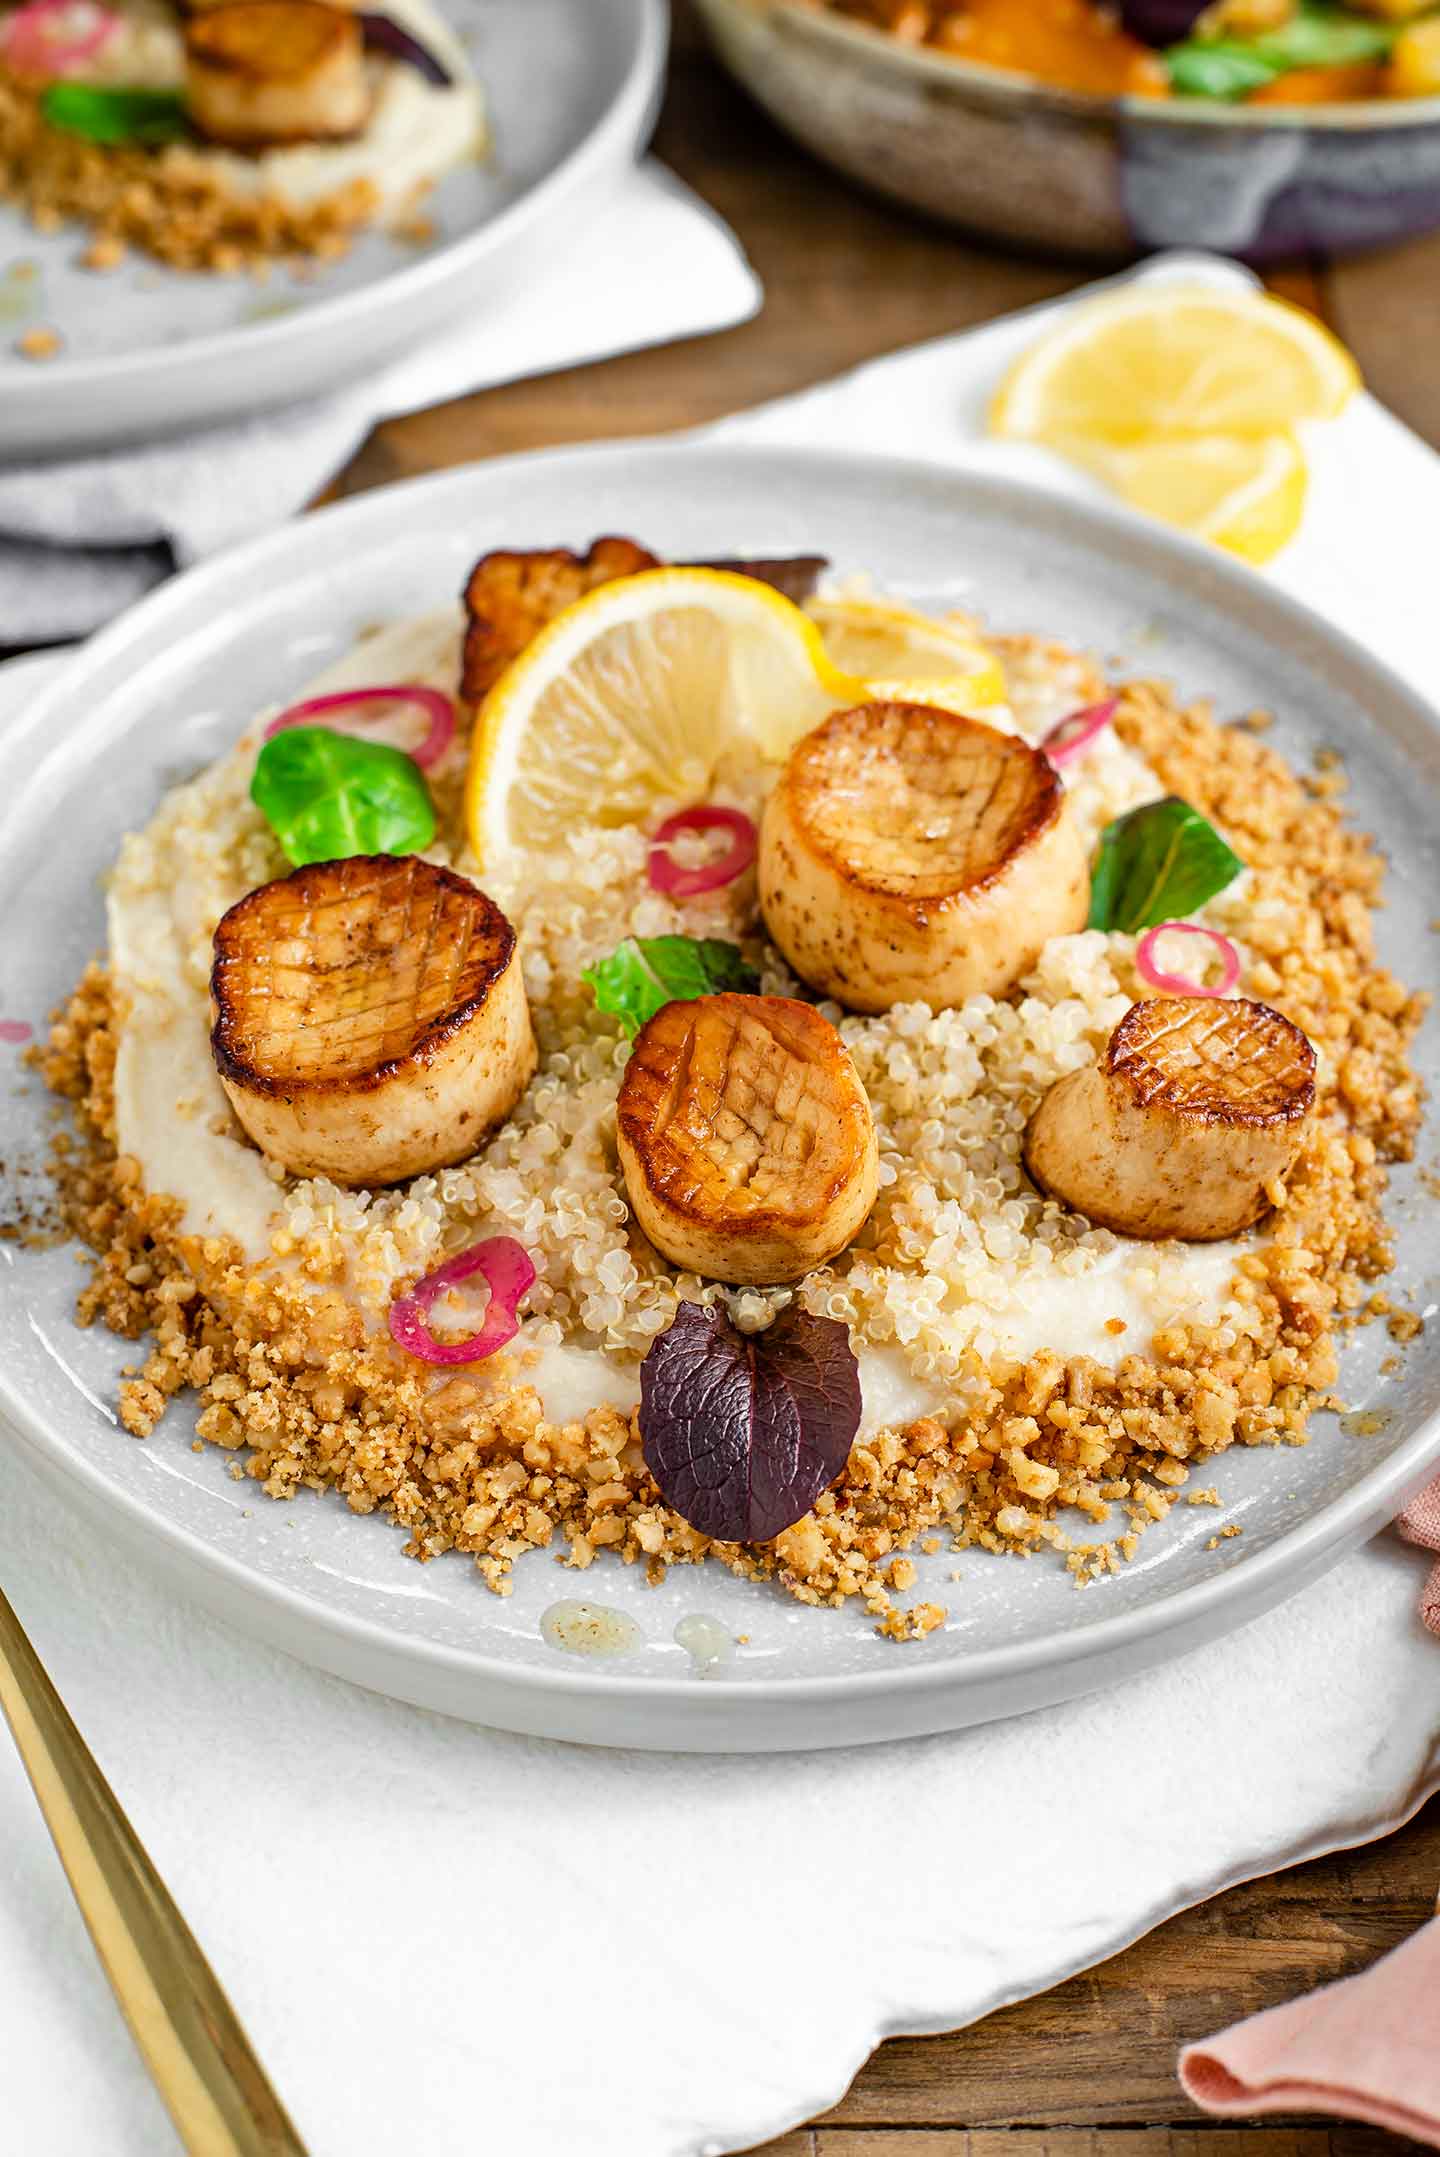 Side view of a plate spread with white parsnip puree, bordered by crumbled candied walnuts and topped with succulent and browned mushroom "scallops".